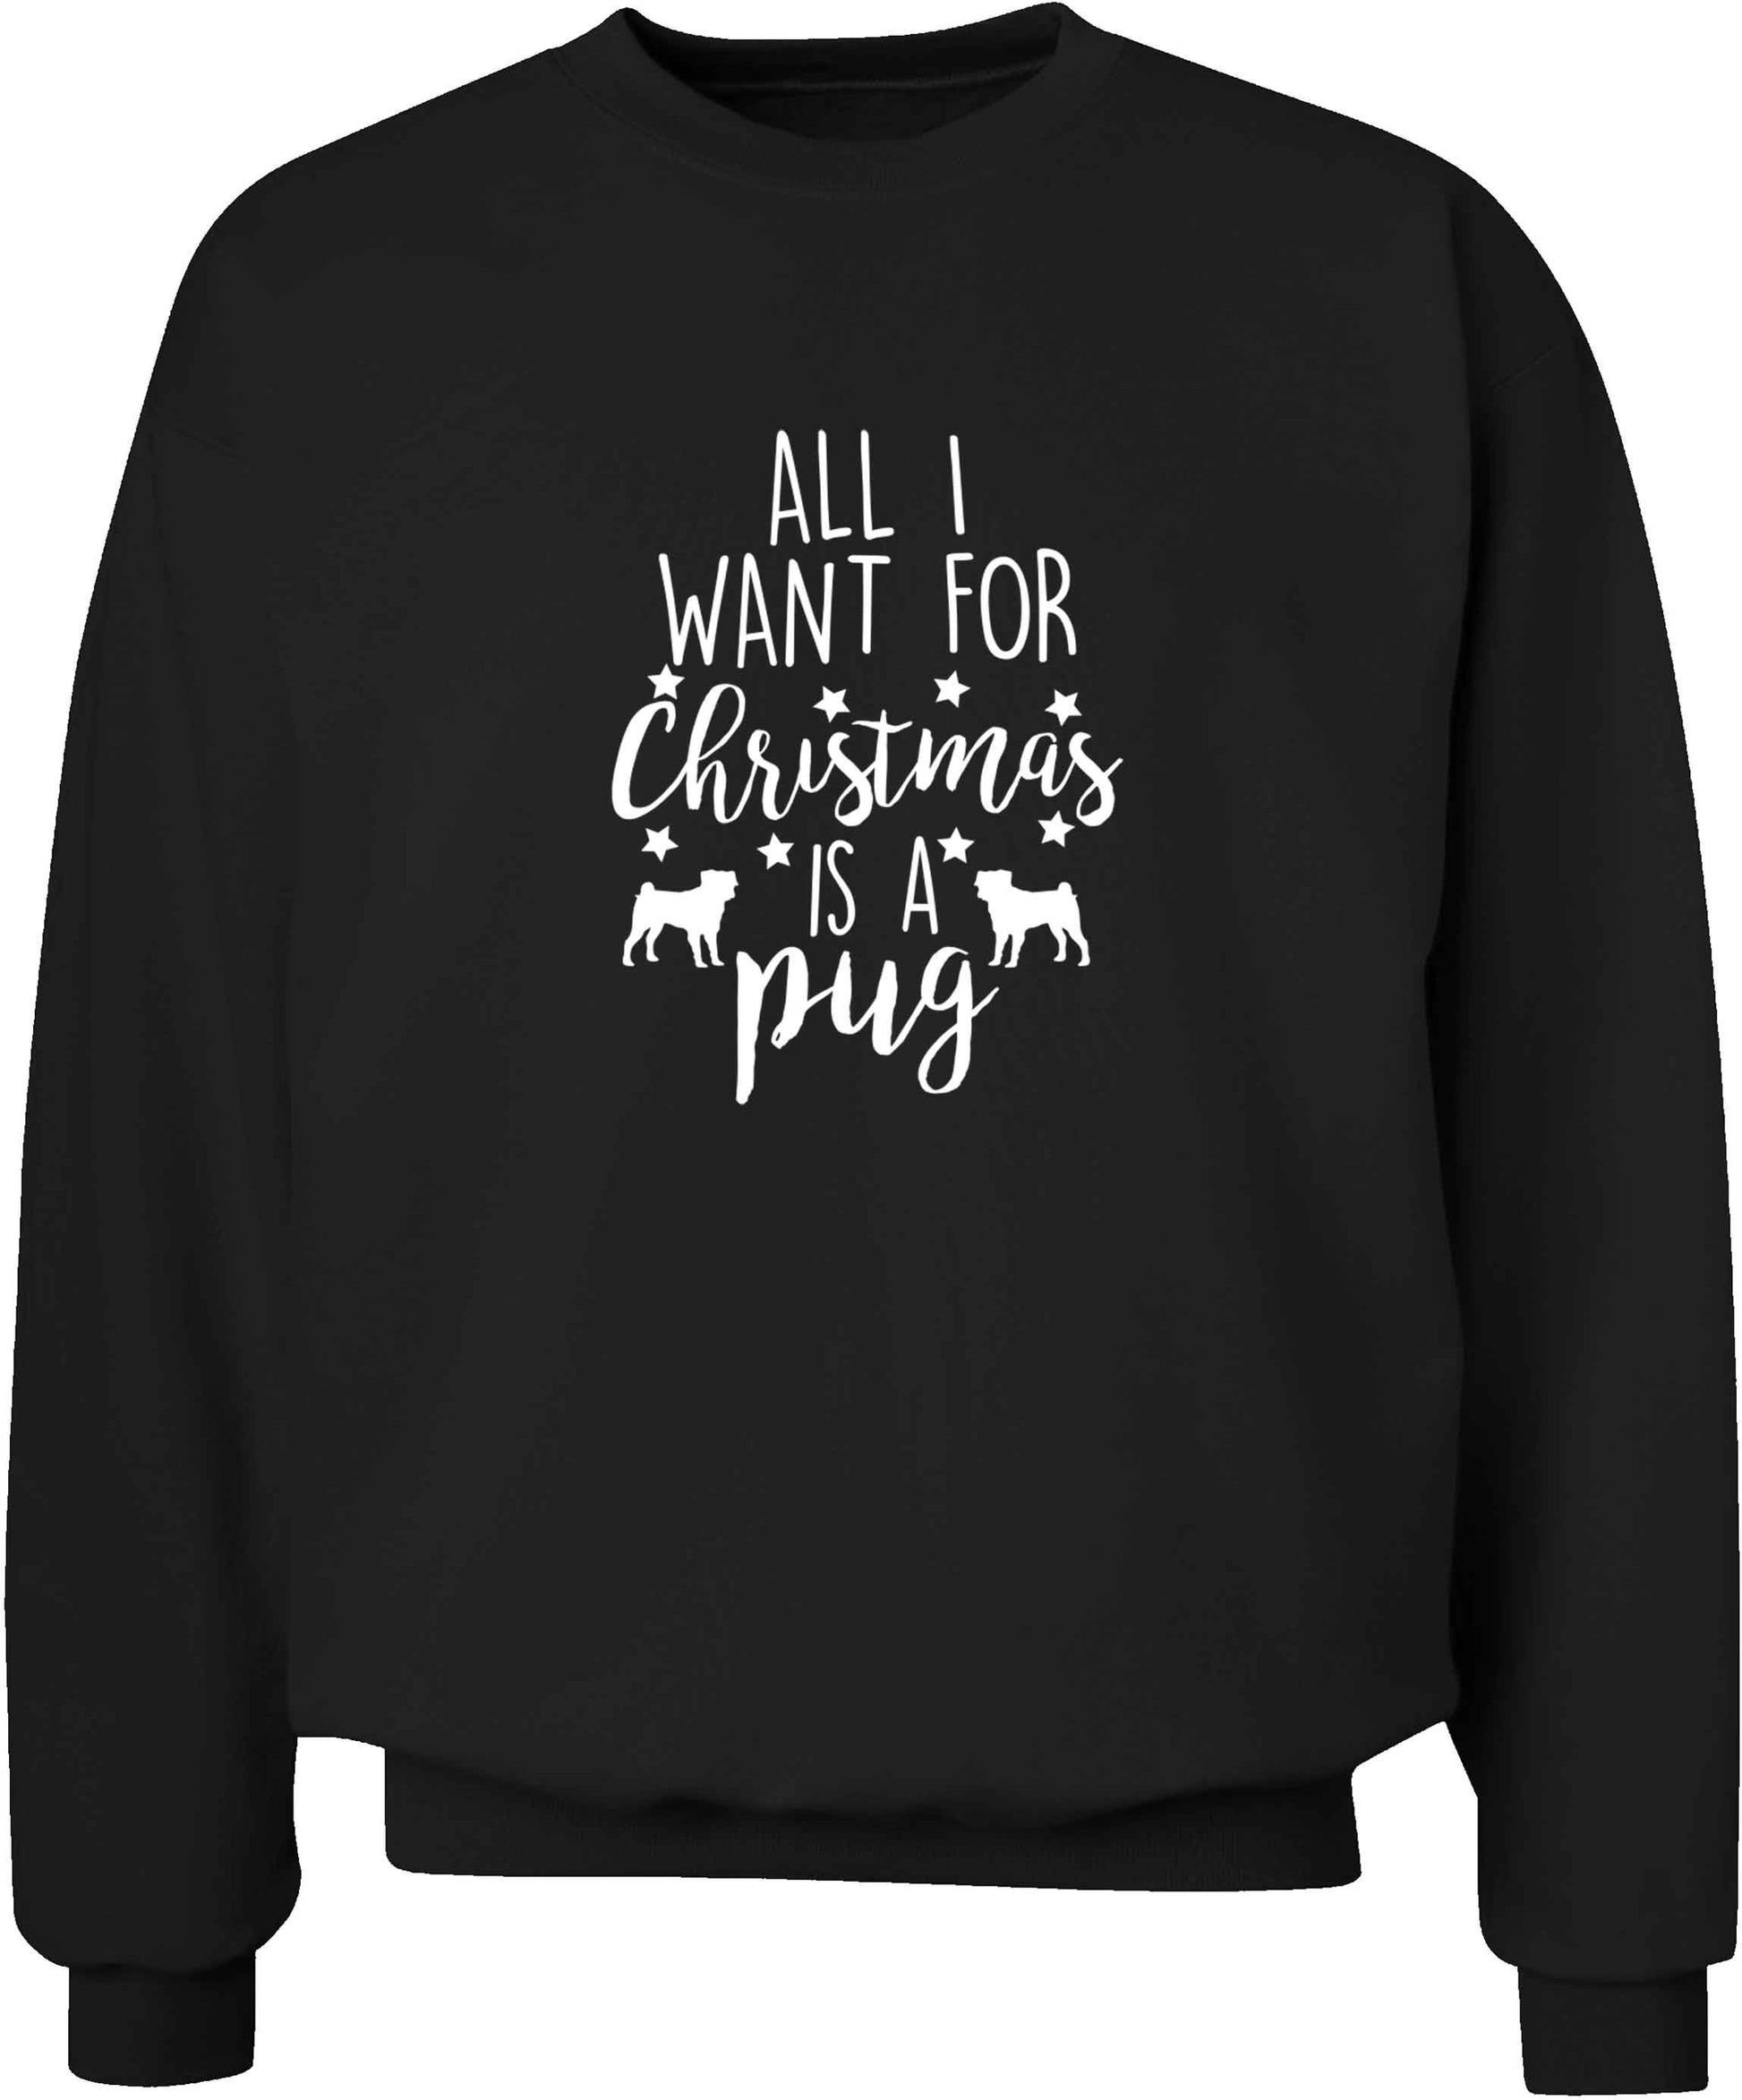 All I want for Christmas is a pug adult's unisex black sweater 2XL